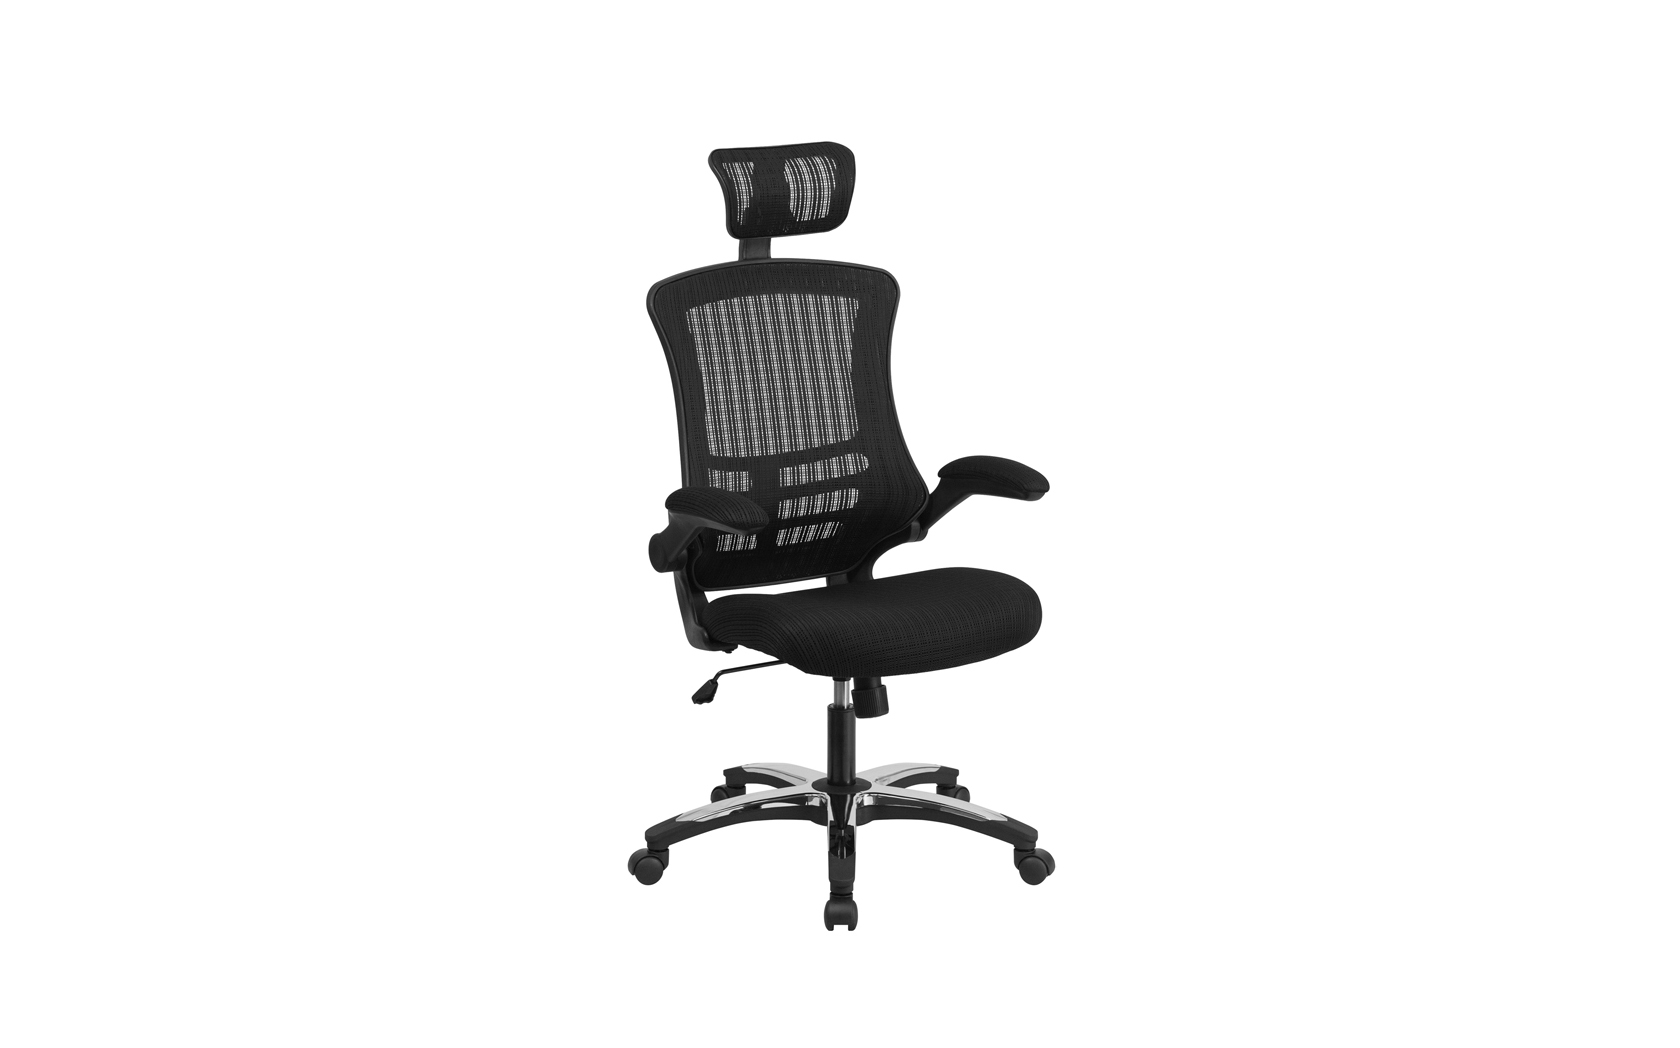 Executive black mesh chair with headrest and black  Cushioned seat. Fold back soft pad faux leather arms   Chrome and black base